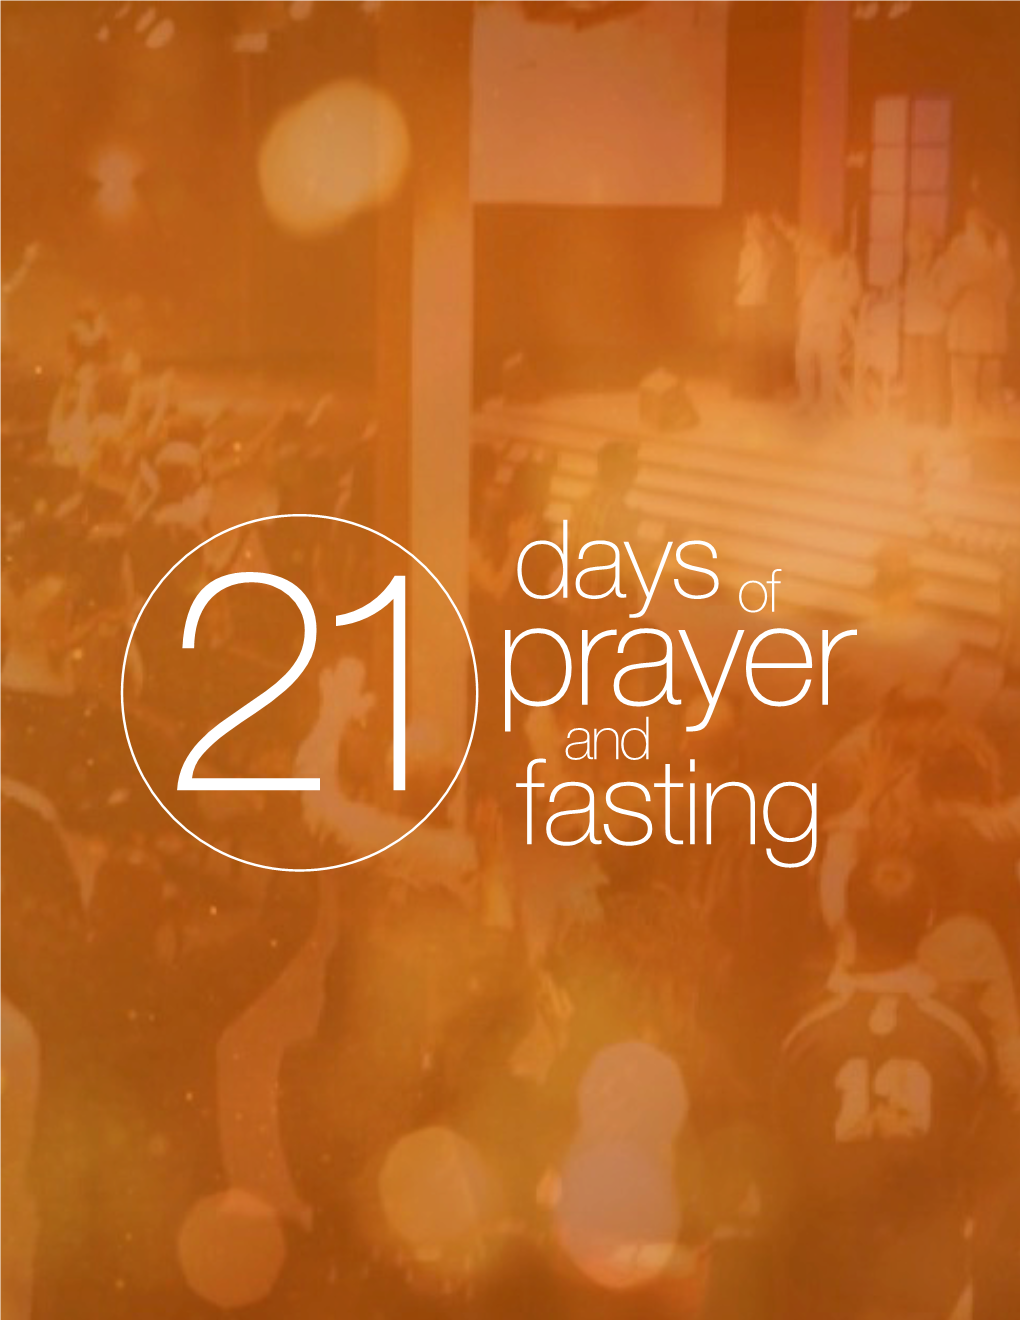 21 Days of Prayer and Fasting Guide Jan 2015 ONLINE